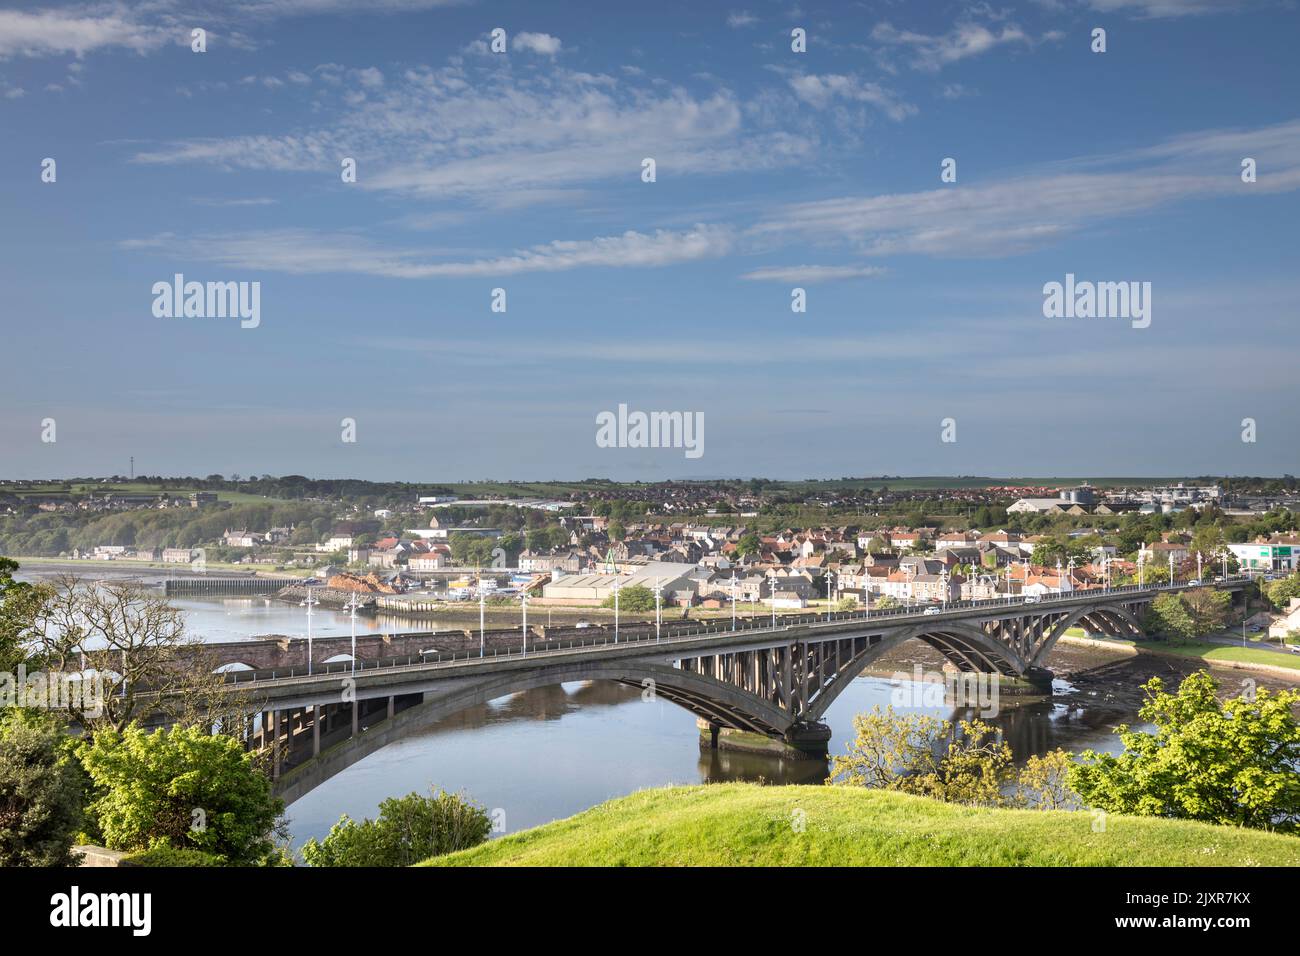 Dating from the 1920s, the Royal Tweed bridge carries road traffic over the river. The older 17th century stone Berwick Bridge can be seen just beyond Stock Photo